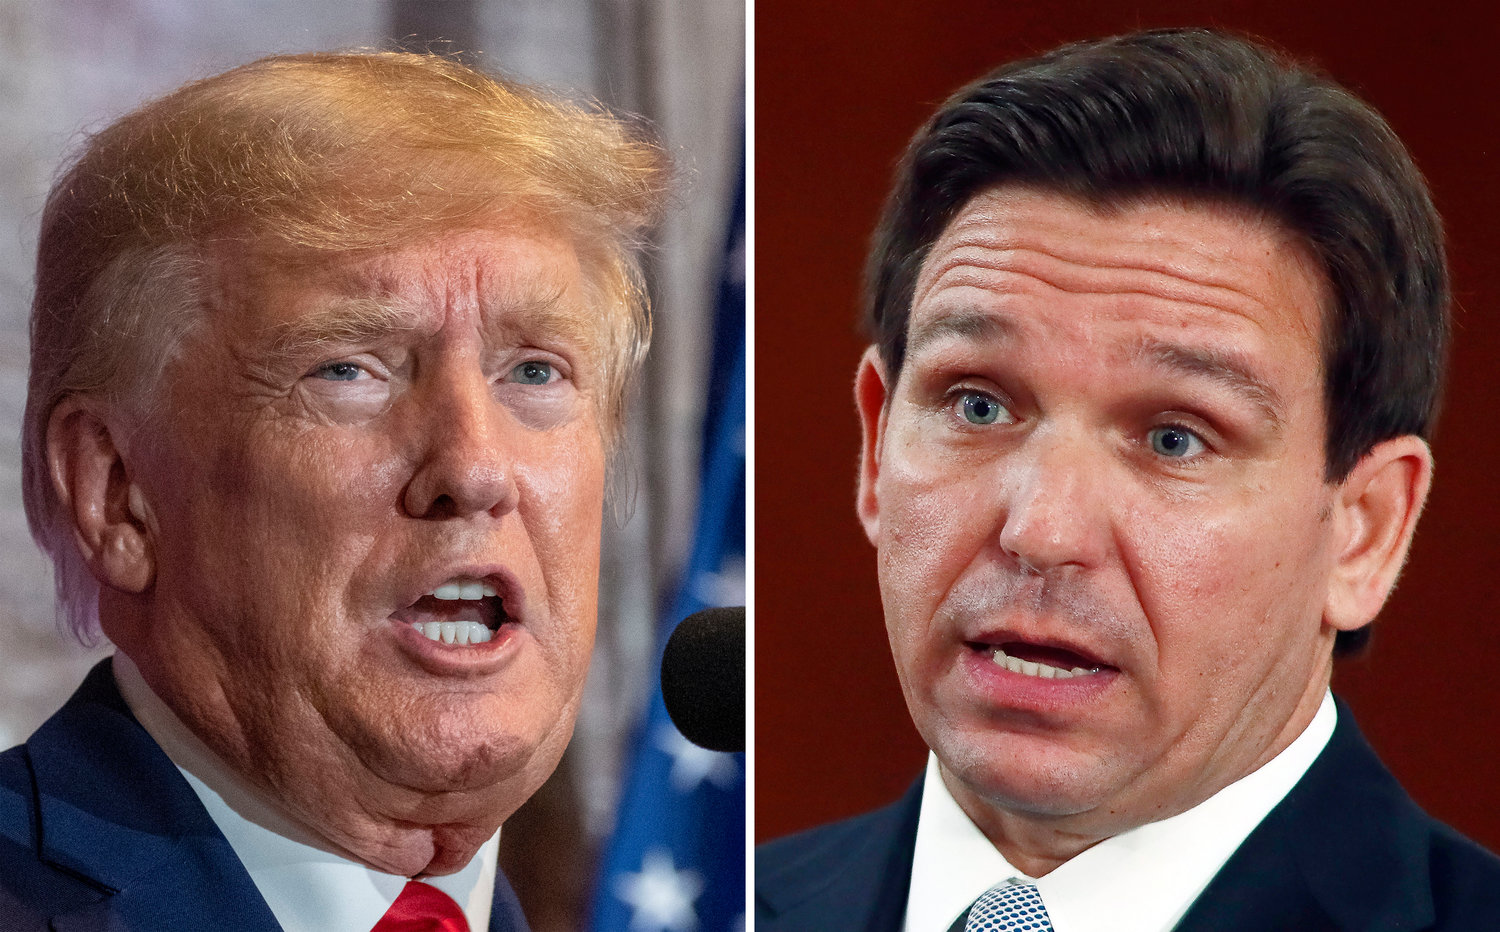 This combination of the photos shows former President Donald Trump, left, and Florida Gov. Ron DeSantis, right. DeSantis’ allies are gaining confidence in his White House prospects as former President Donald Trump’s legal woes mount. Trump, a 2024 Republican presidential candidate, is facing possible criminal charges in New York, Georgia and Washington. The optimism around DeSantis comes even as a collection of Republican officials and MAGA influencers raise concerns about the Florida governor’s readiness for national stage.